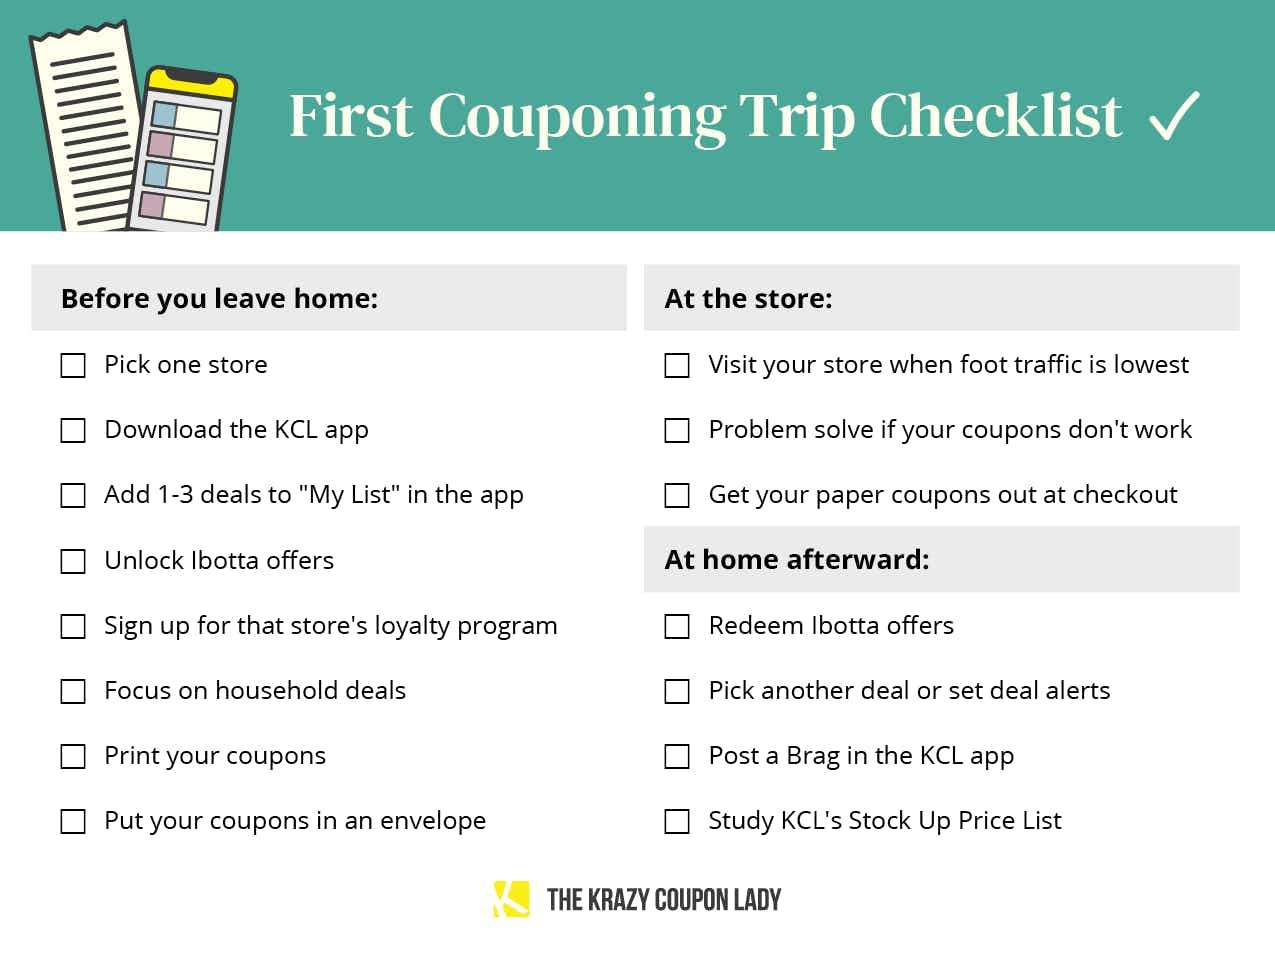 A graphic showing your first coupon trip checklist